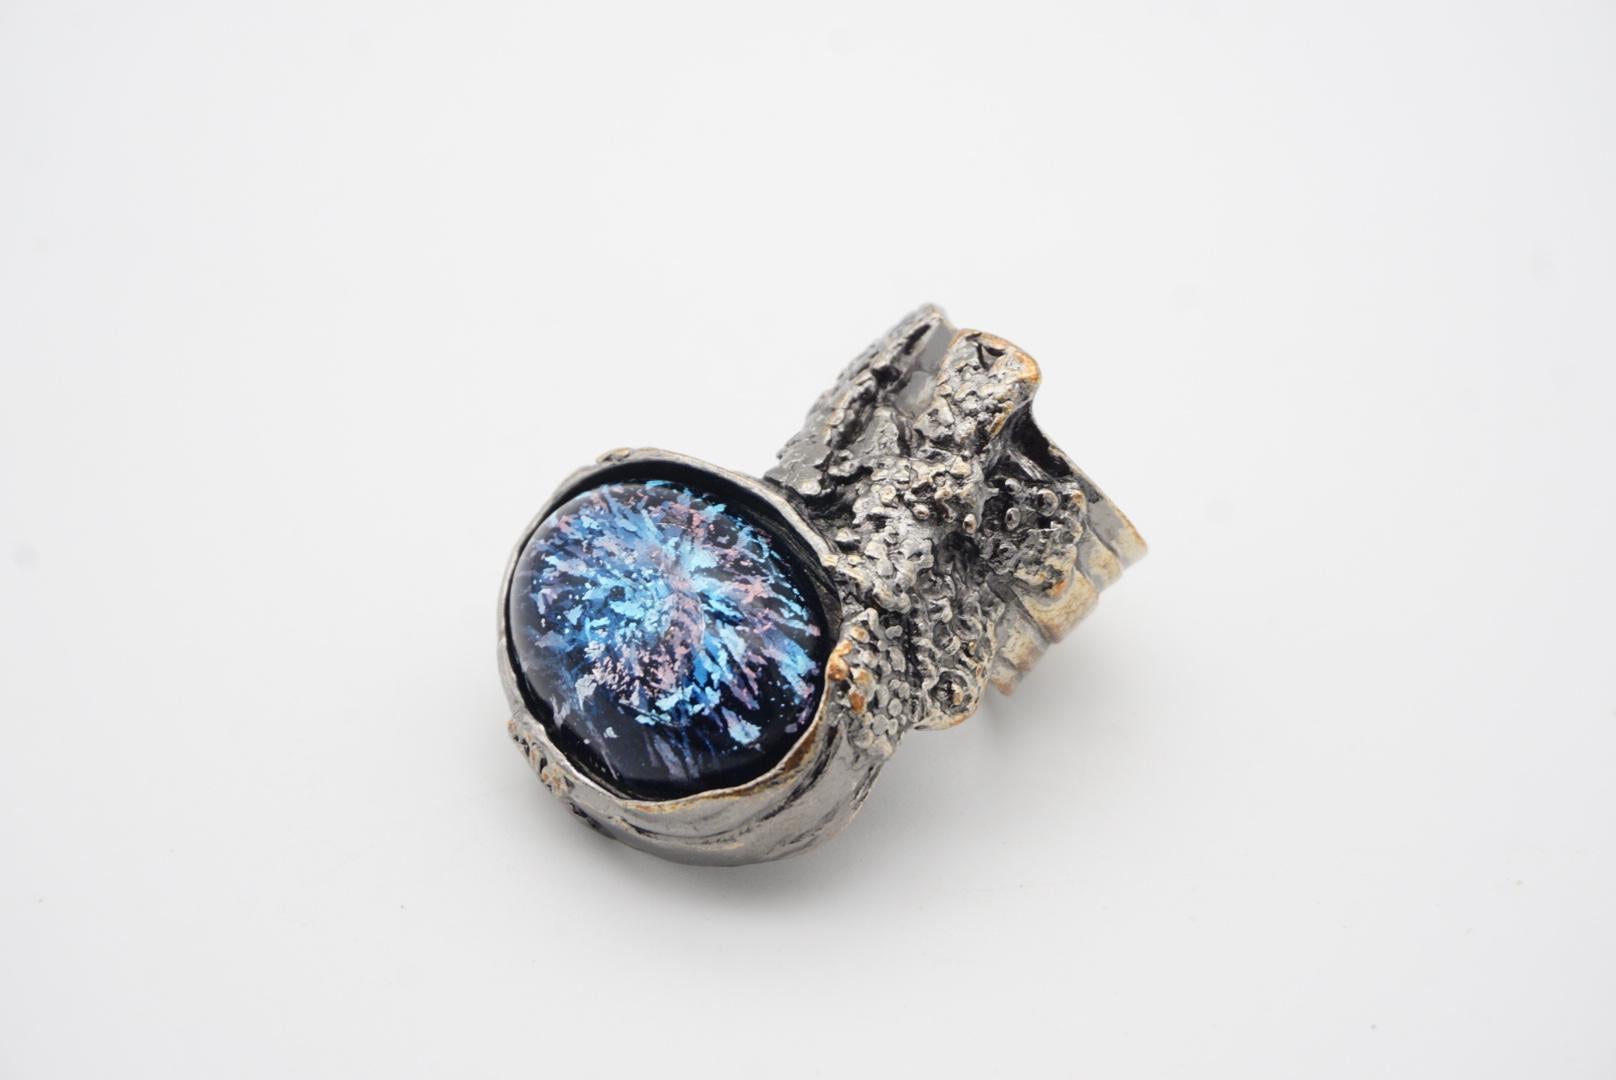 Yves Saint Laurent YSL Arty Clear Icy Blue Black Cabochon Statement Ring Size 6 In Good Condition For Sale In Wokingham, England